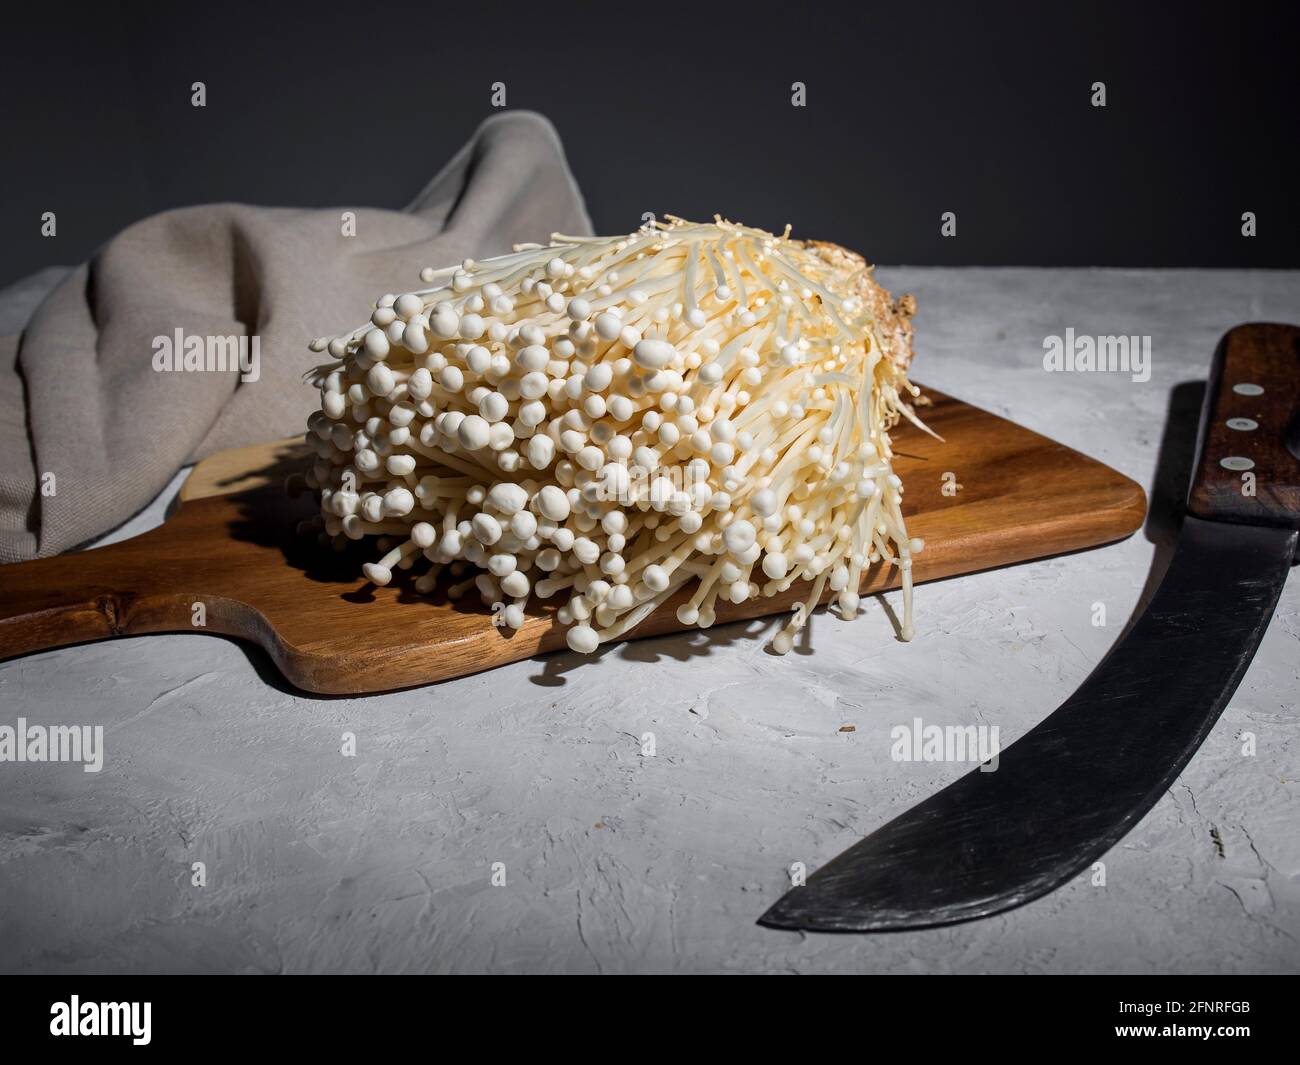 Fresh golden needle mushroom or enoki mushrooms, on wooden cutting board with vintage knife on gray concrete background Stock Photo